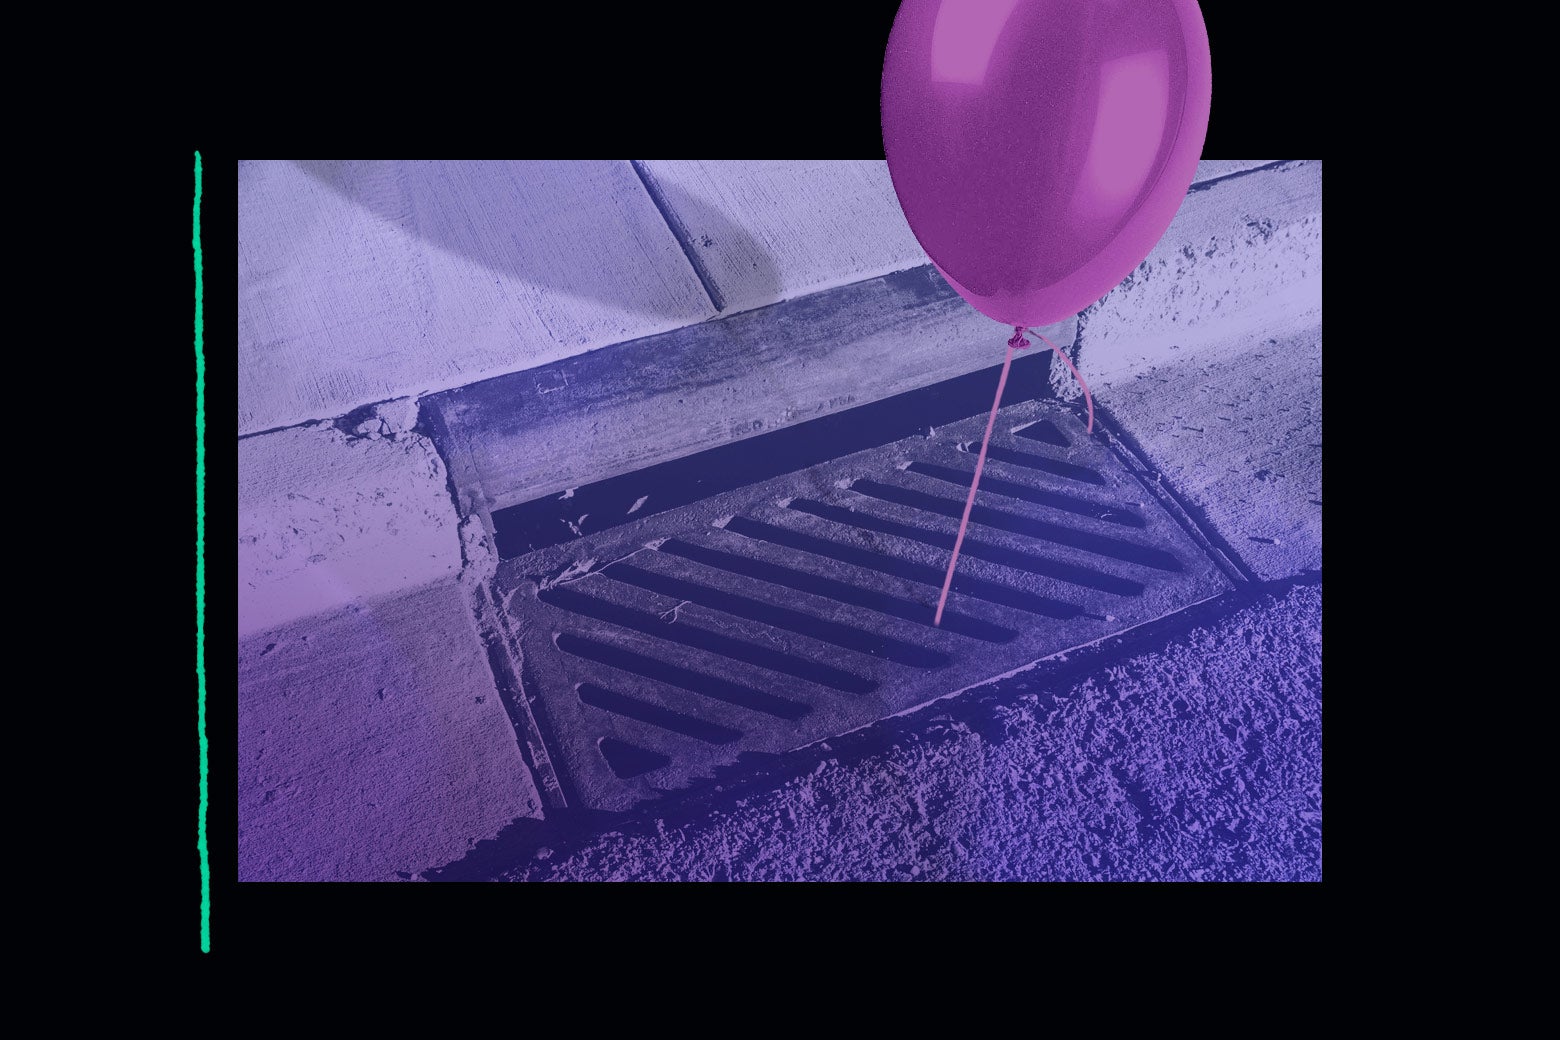 A red balloon floats up from a sewer grate.